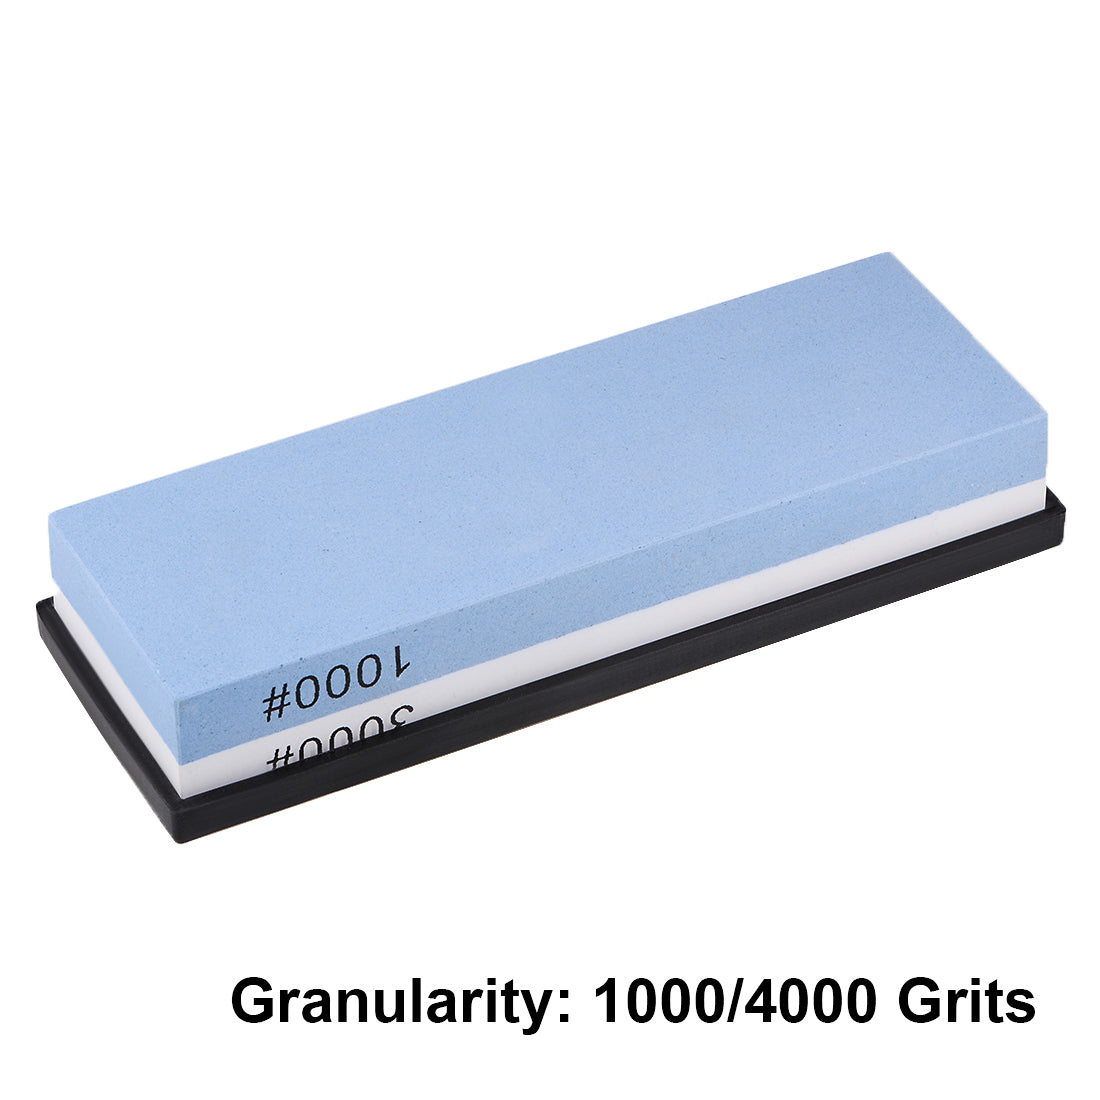 uxcell Uxcell Double-Sided Whetstone Knives Sharpener Sharpening Stone 1000/3000 Grit for Scissors Razors Carving Tool